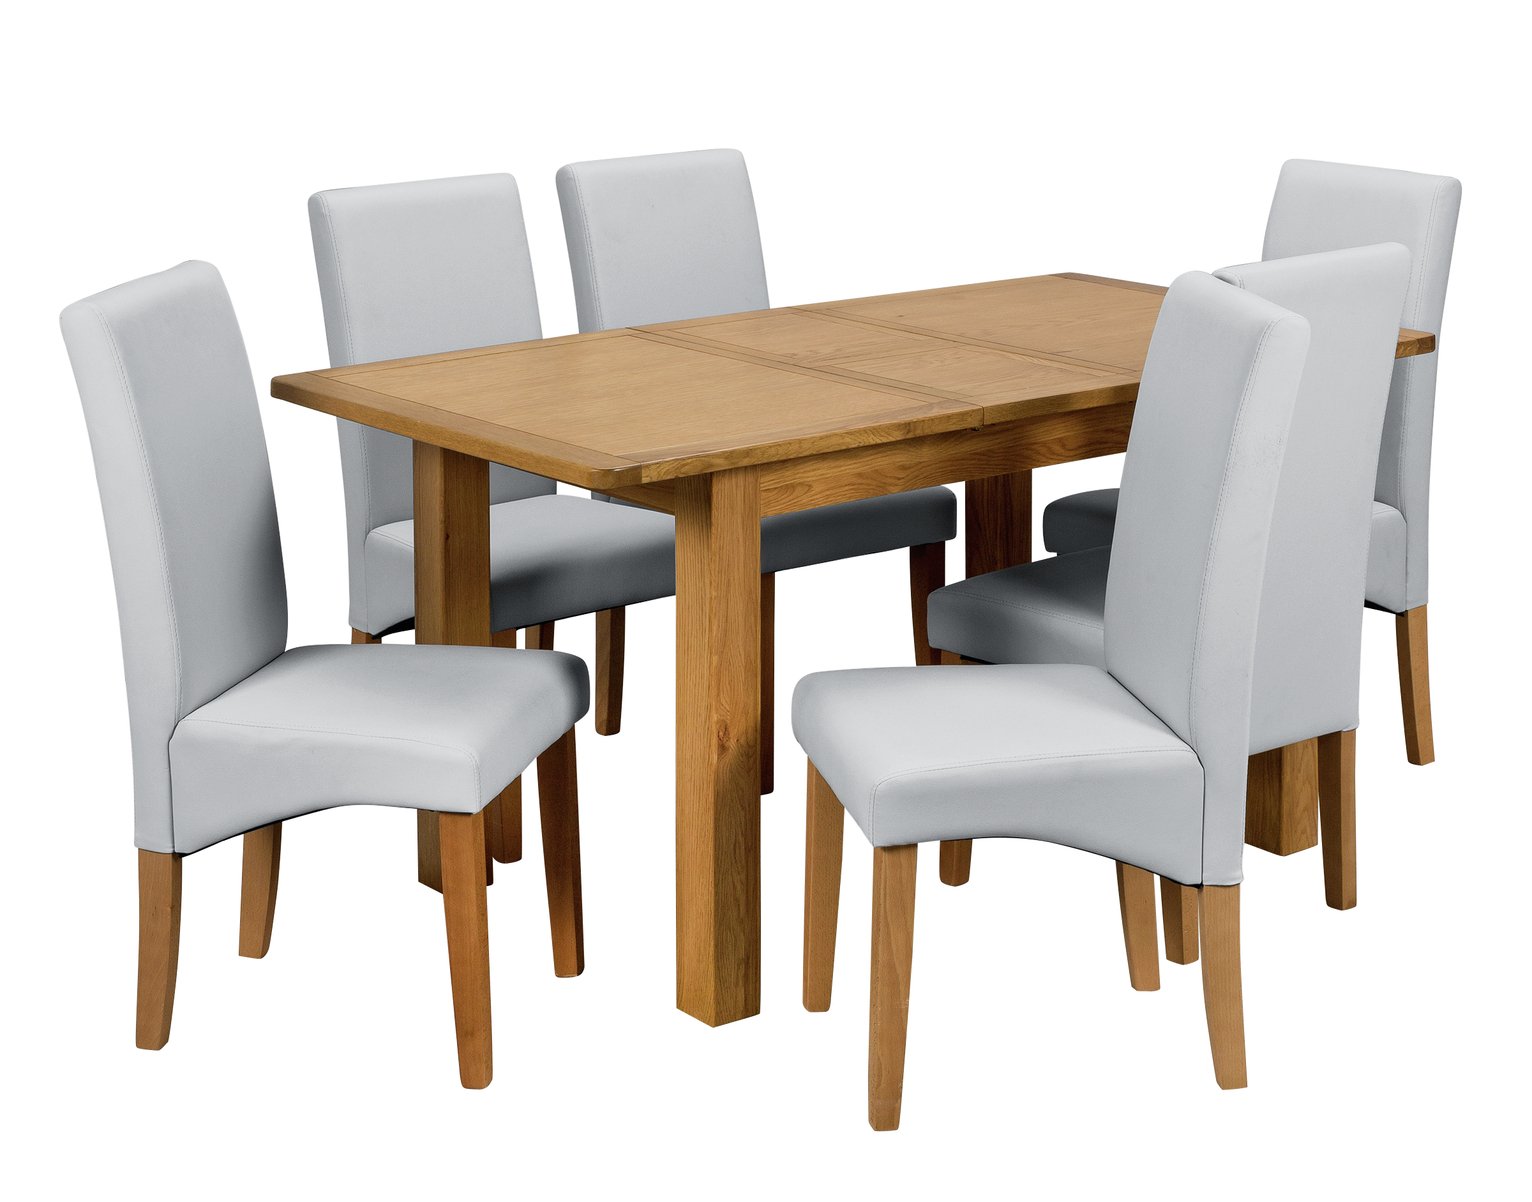 Argos Home Ashwell Extendable Table and 6 Chairs Reviews